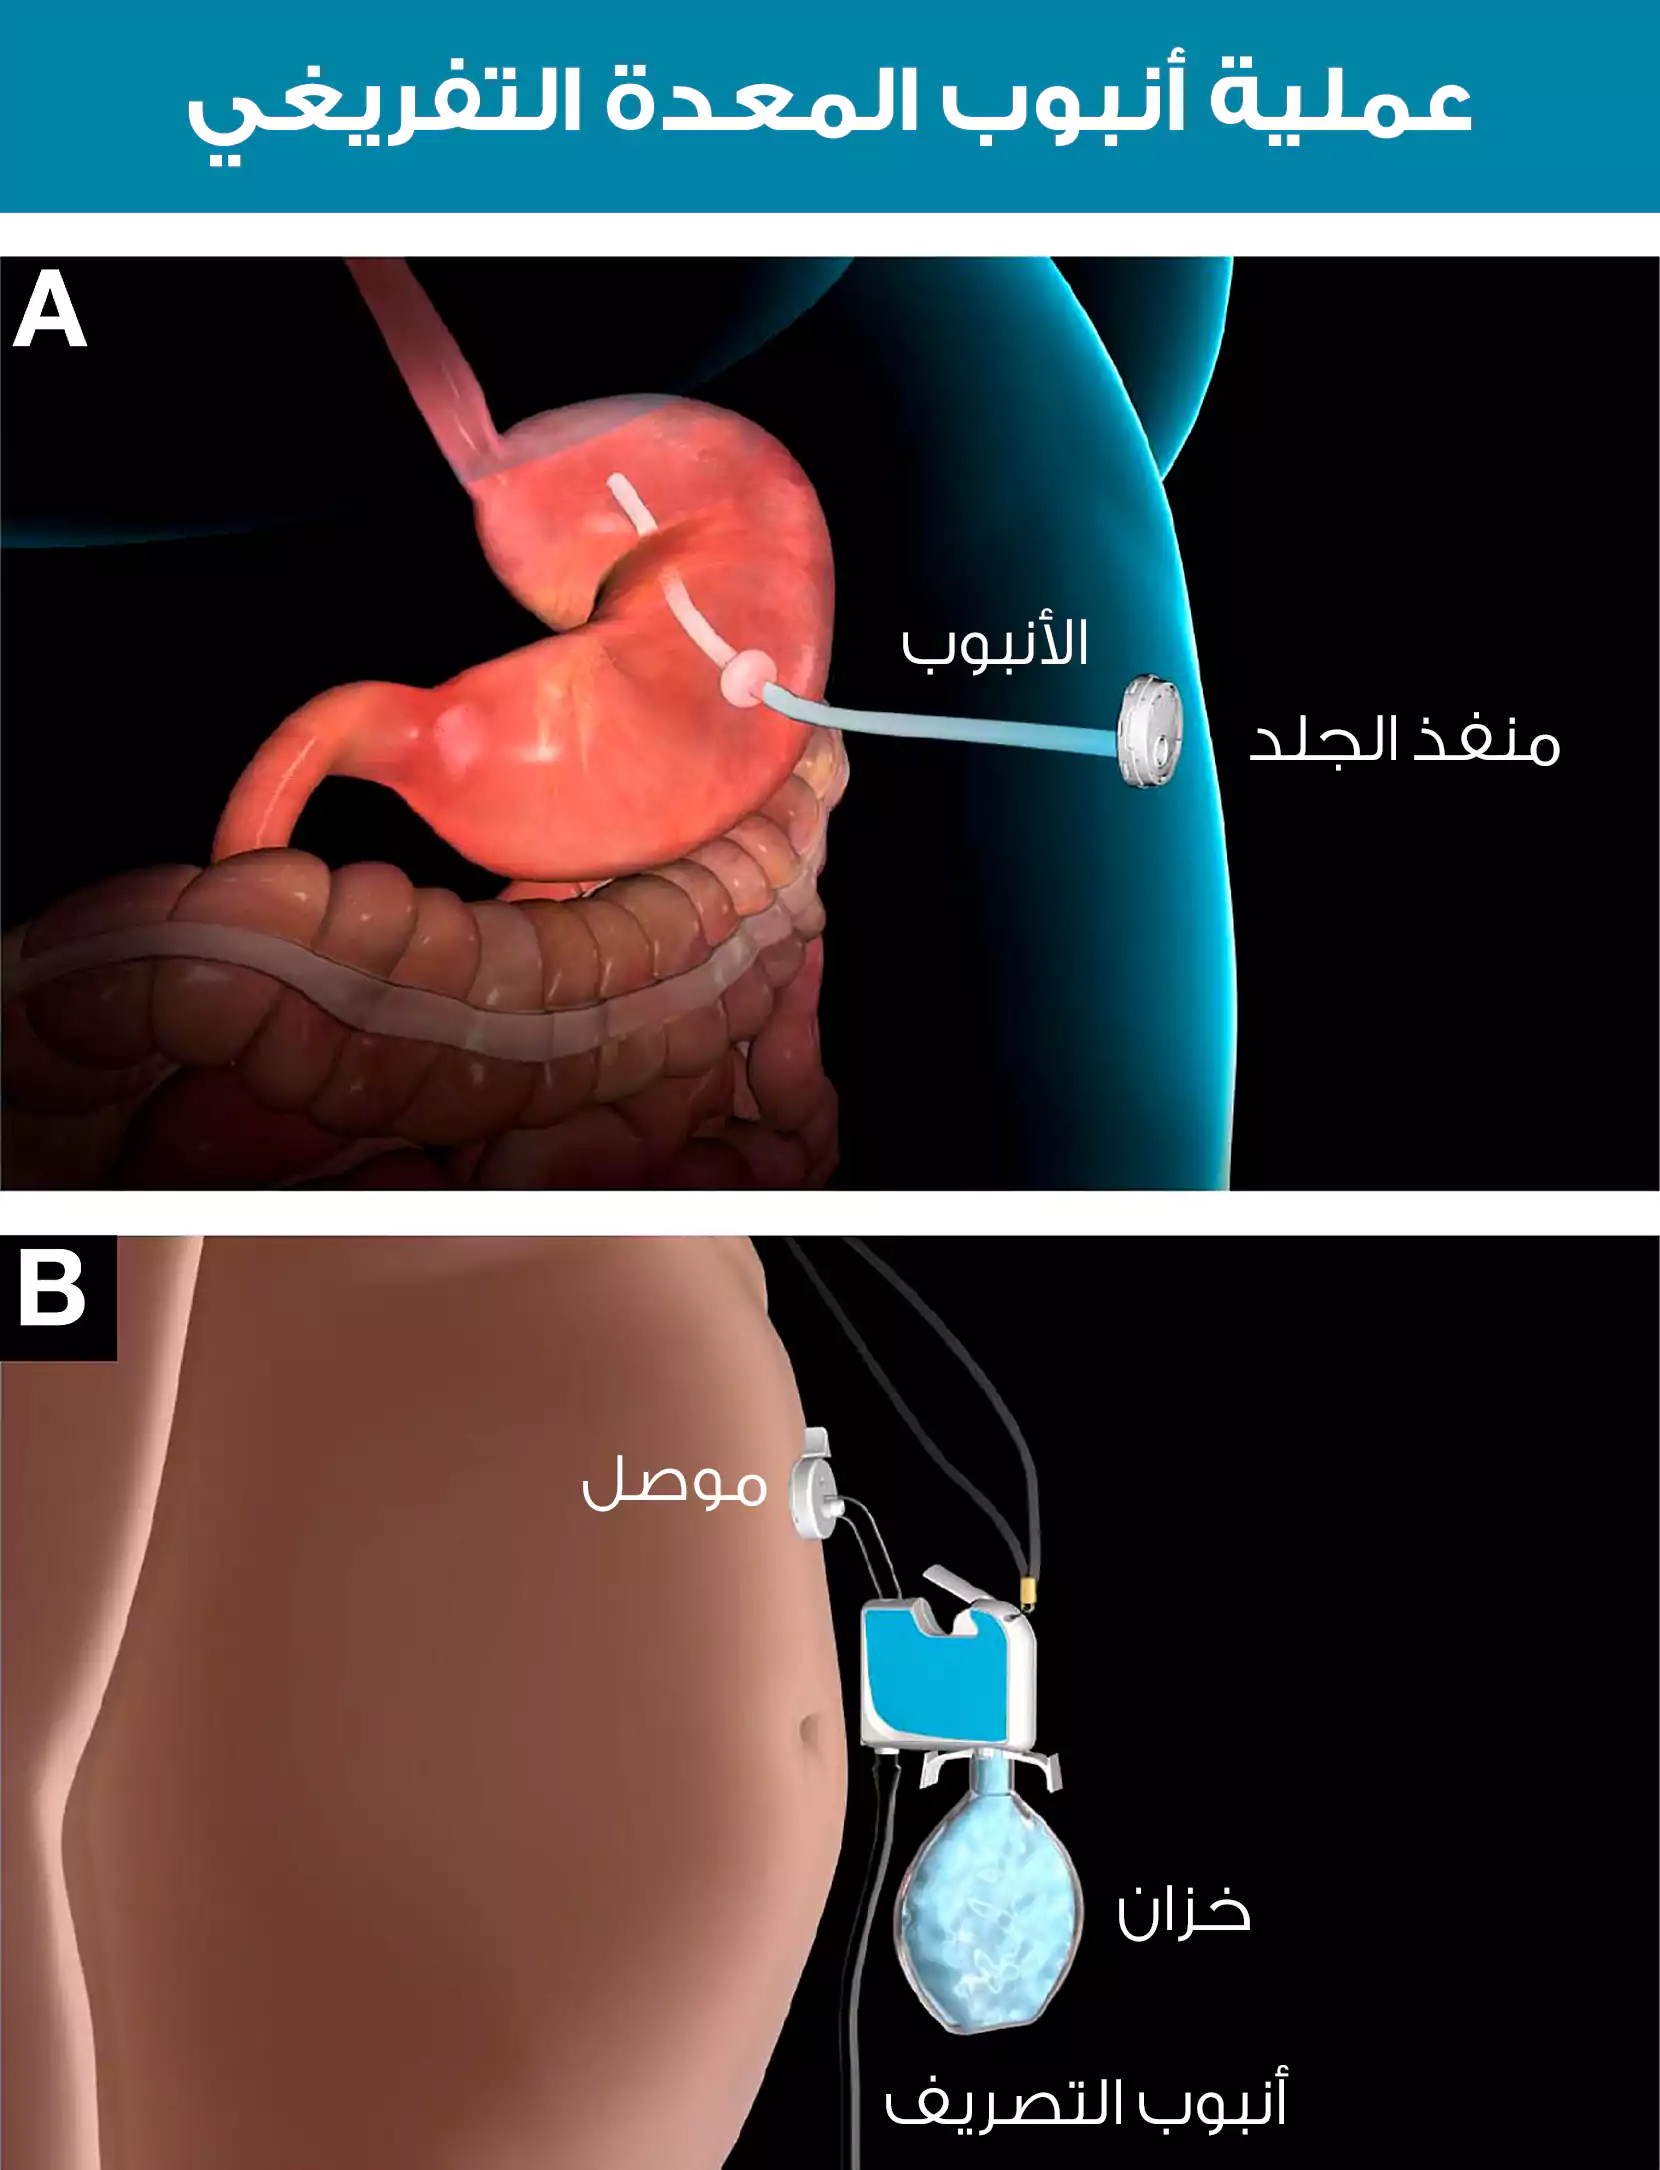 A picture of how the gastric emptying tube works and empties most of the food without digesting it